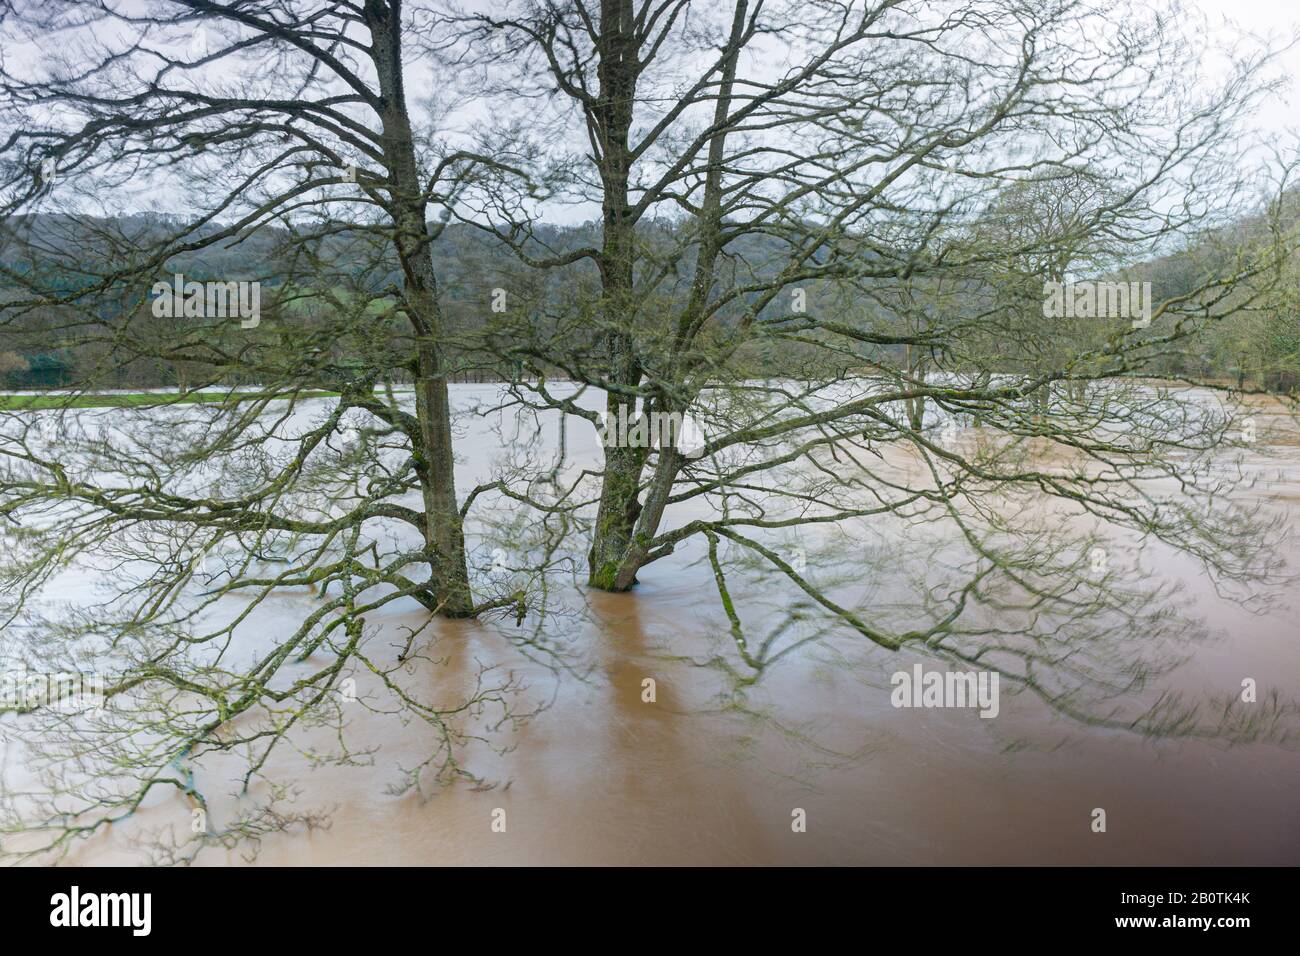 The River Wye in spate at Bigsweir on the Monmouthshire - Gloucestershire border. February 2020. Stock Photo